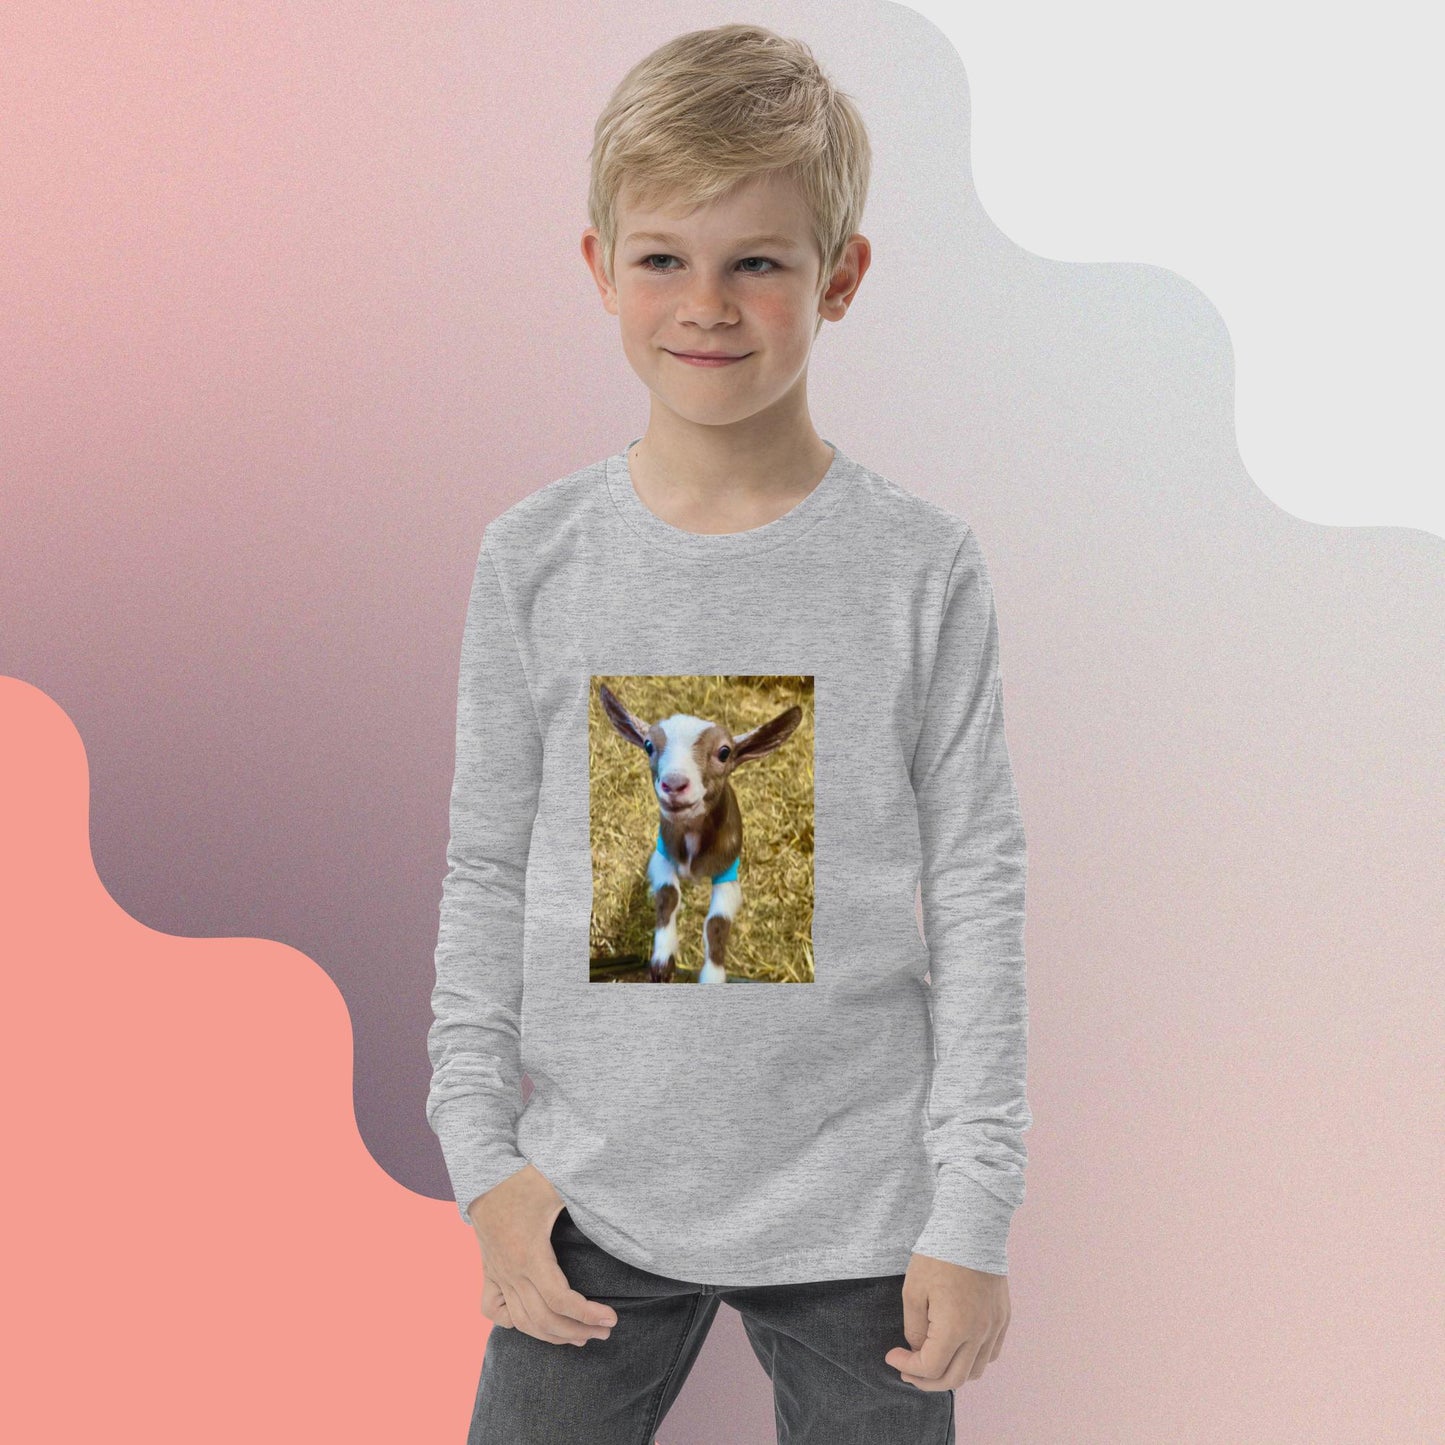 Youth long sleeve tee goat kid smiling